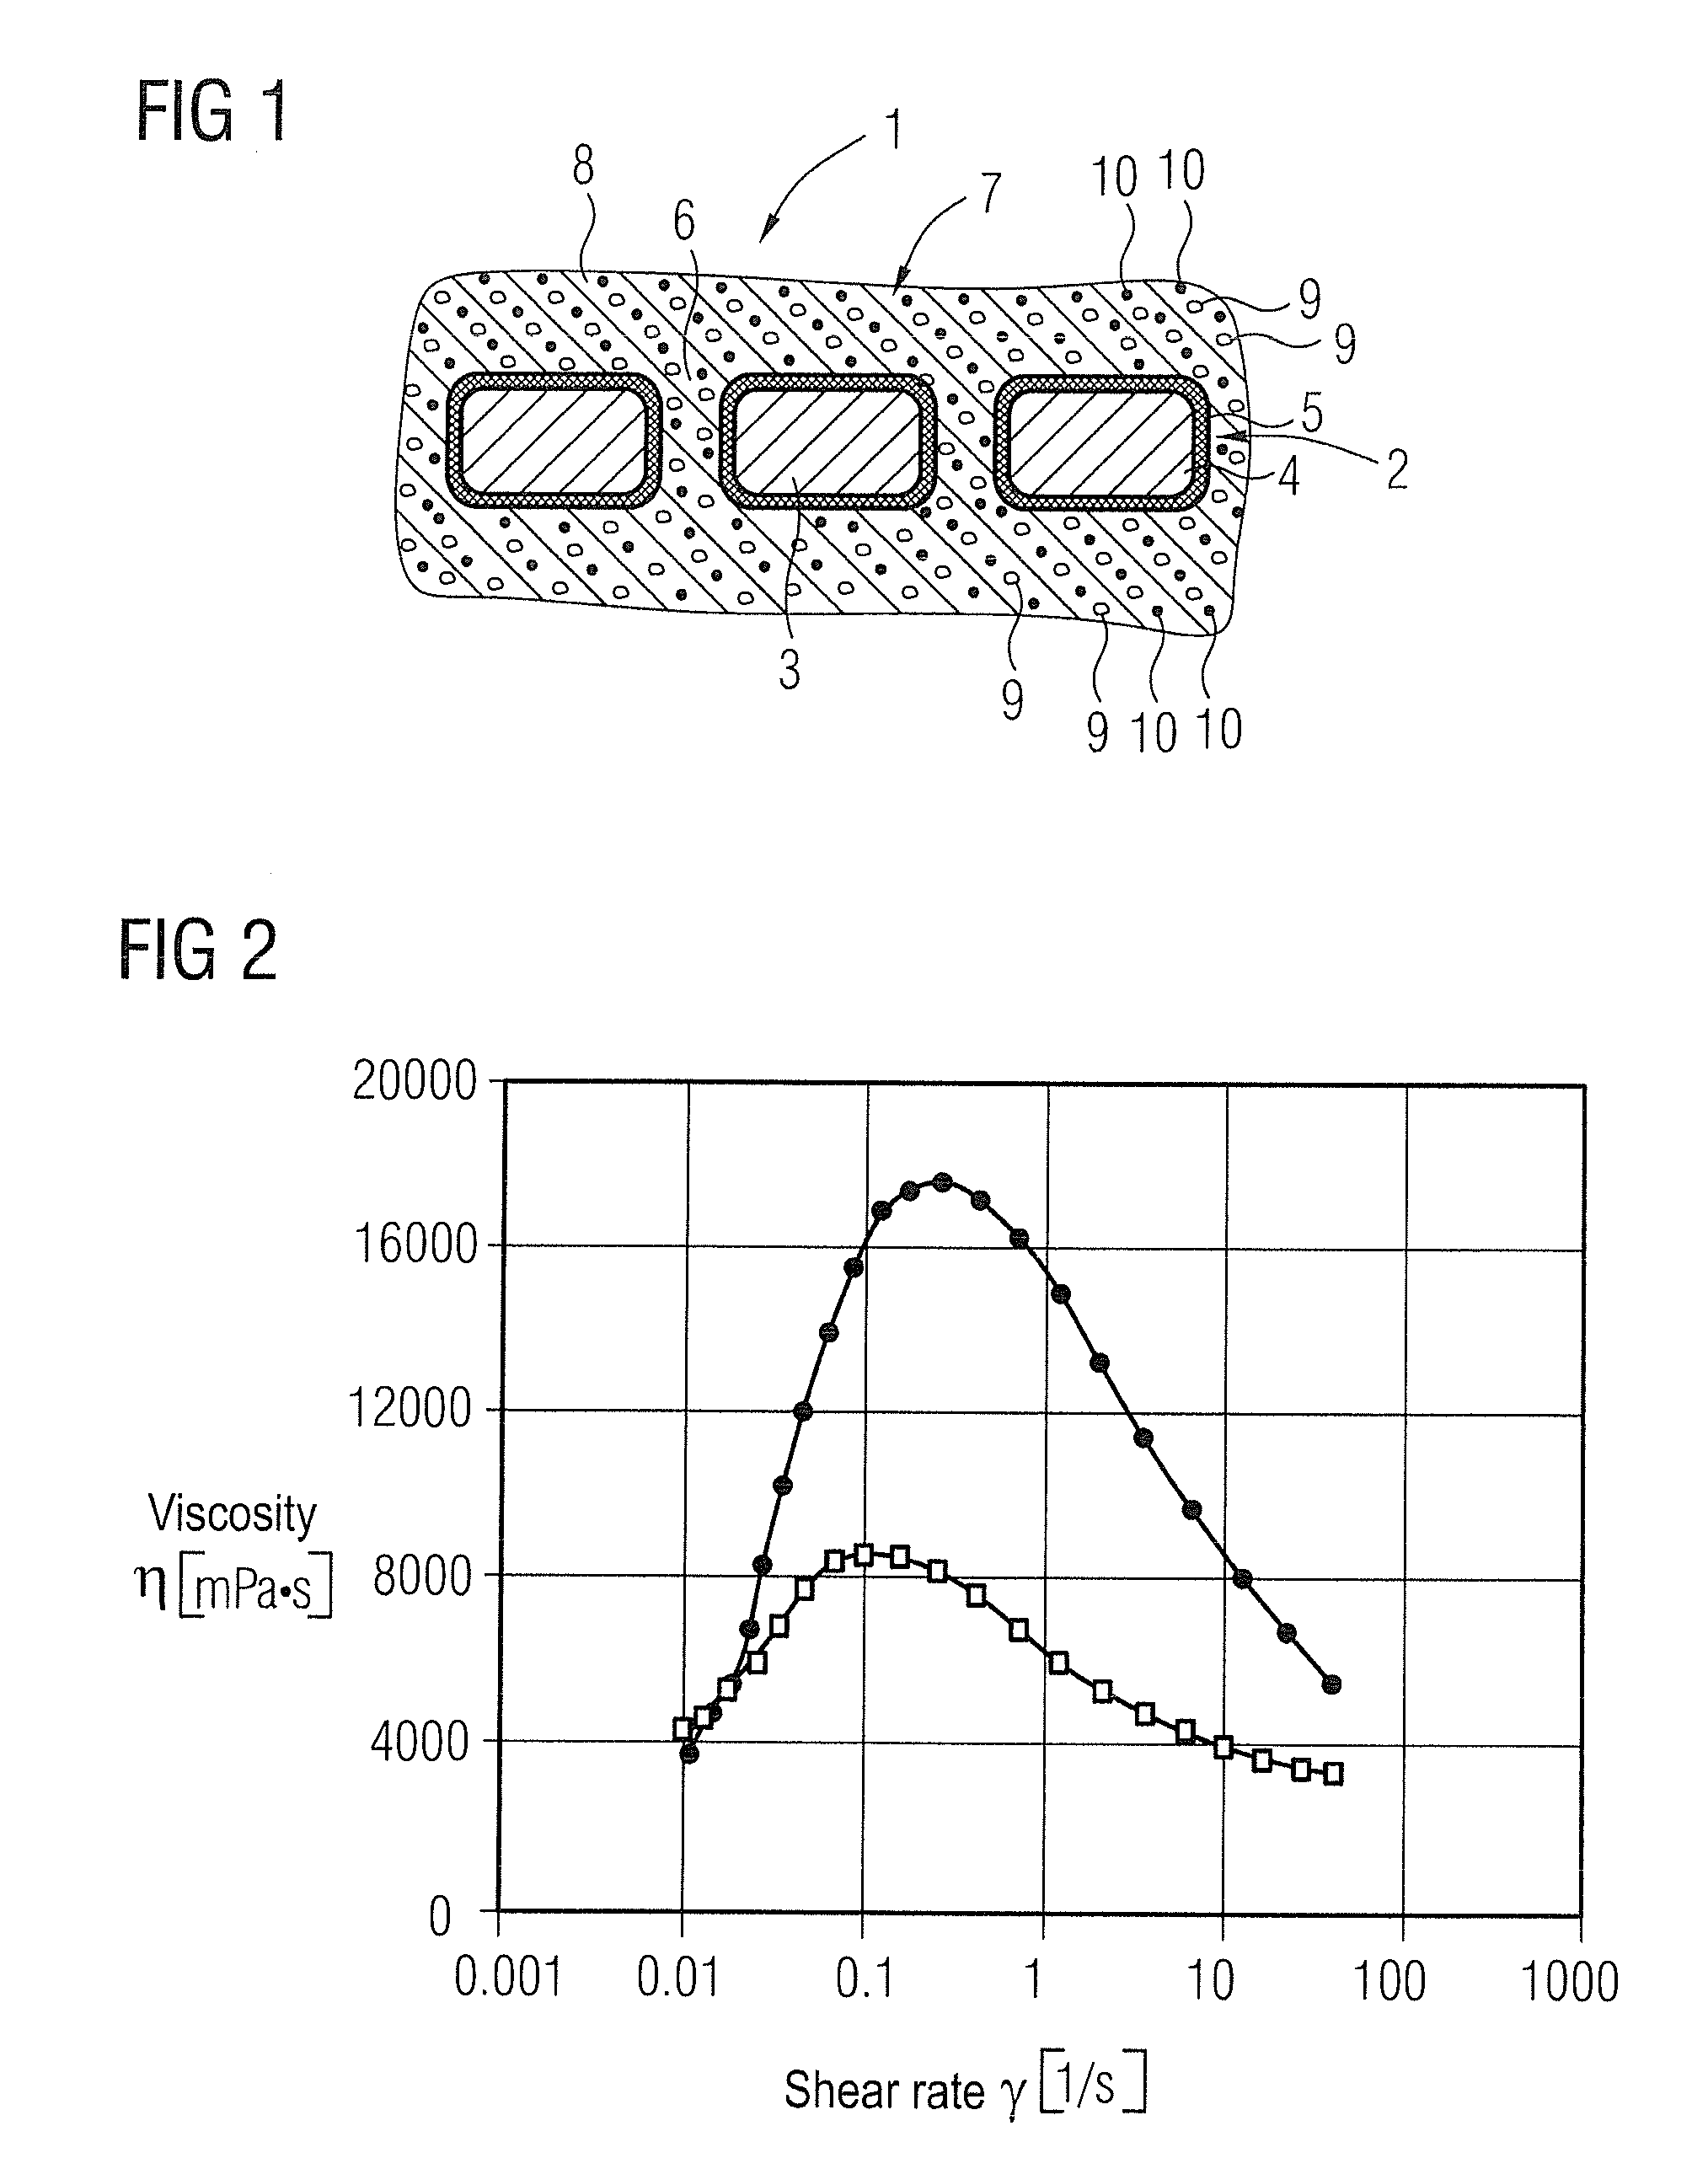 Casting compound suitable for casting an electronic module, in particular a large-volume coil such as a gradient coil